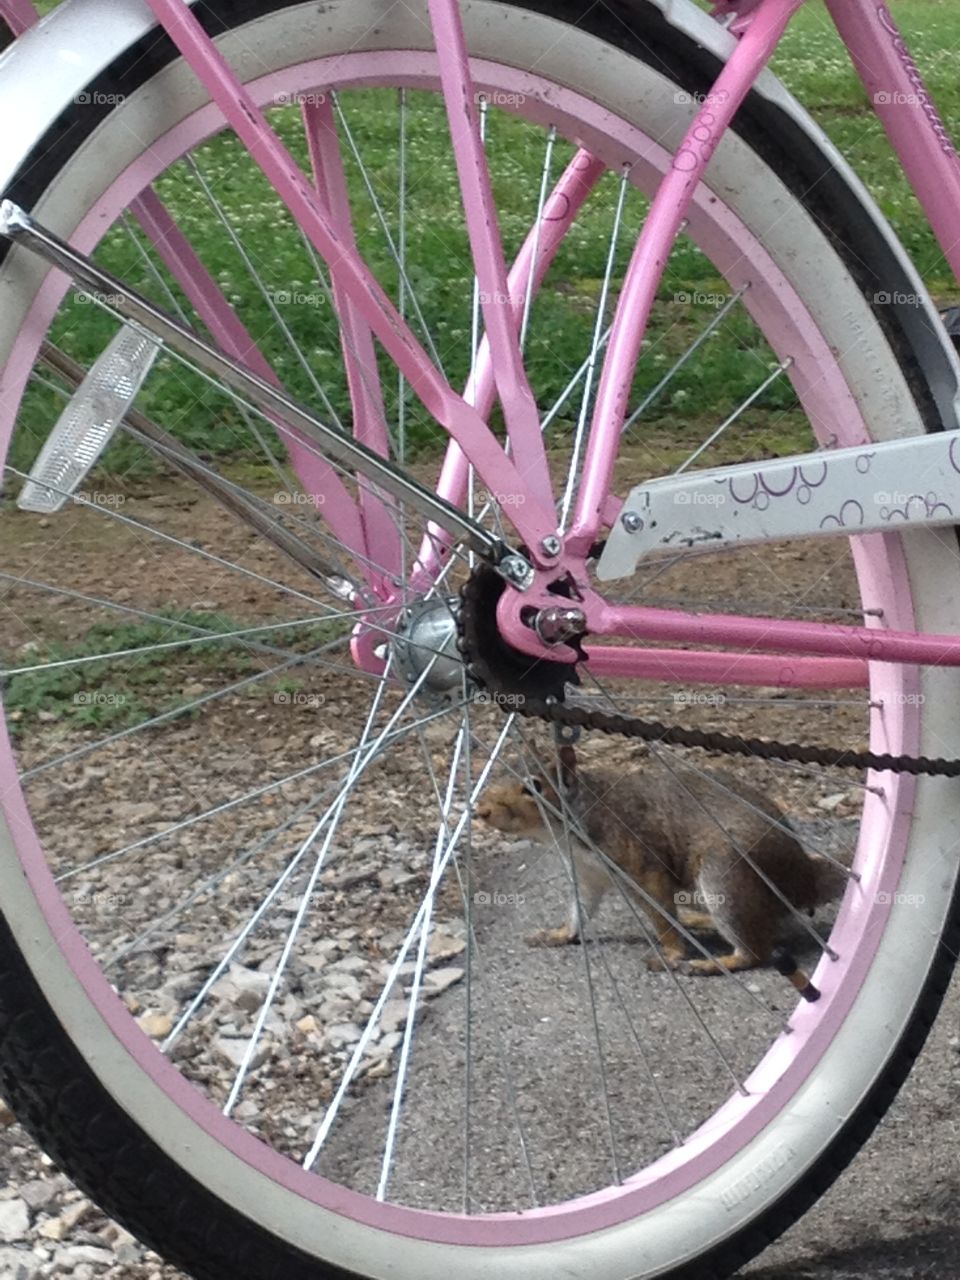 Squirrell and cycle. Squirrel playing near bicycle